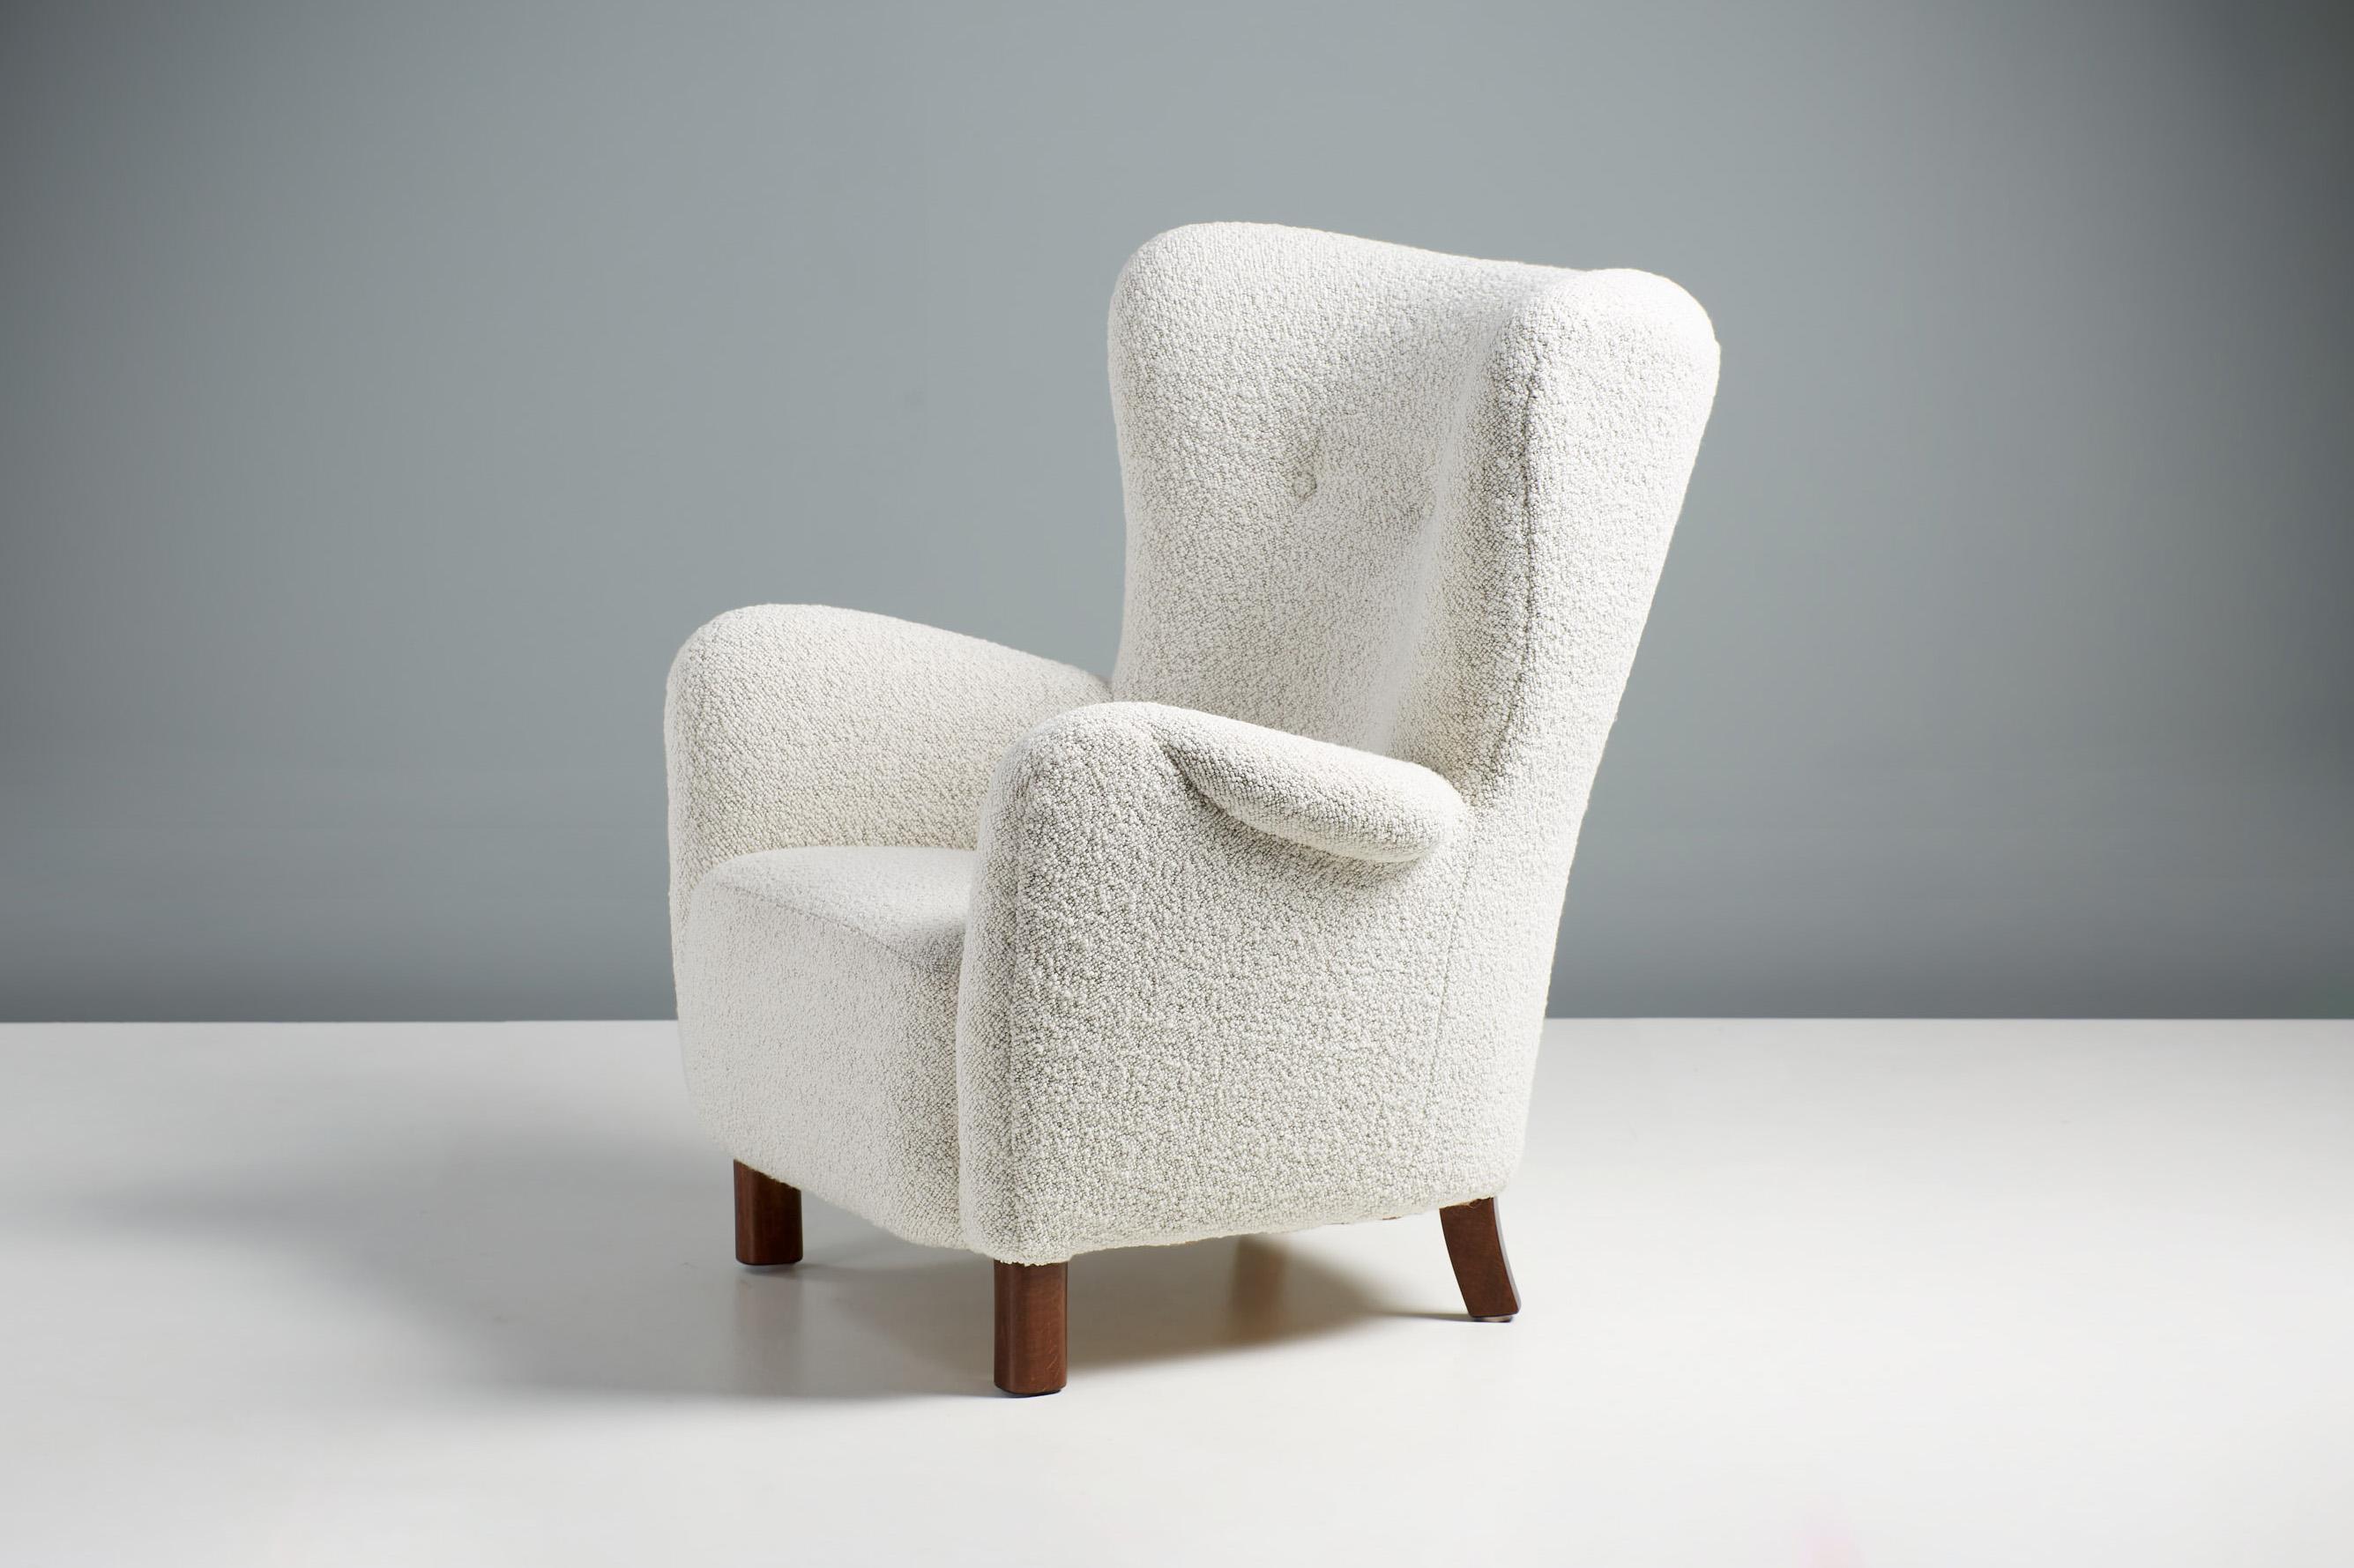 Peter Hvidt Armchair for Fritz Hansen Denmark, circa 1940s.

A wing-back armchair produced by Fritz Hansen in Denmark circa 1940s and designed by Danish icon: Peter Hvidt. The chair has been reupholstered in exquisite wool bouclé fabric from Dedar